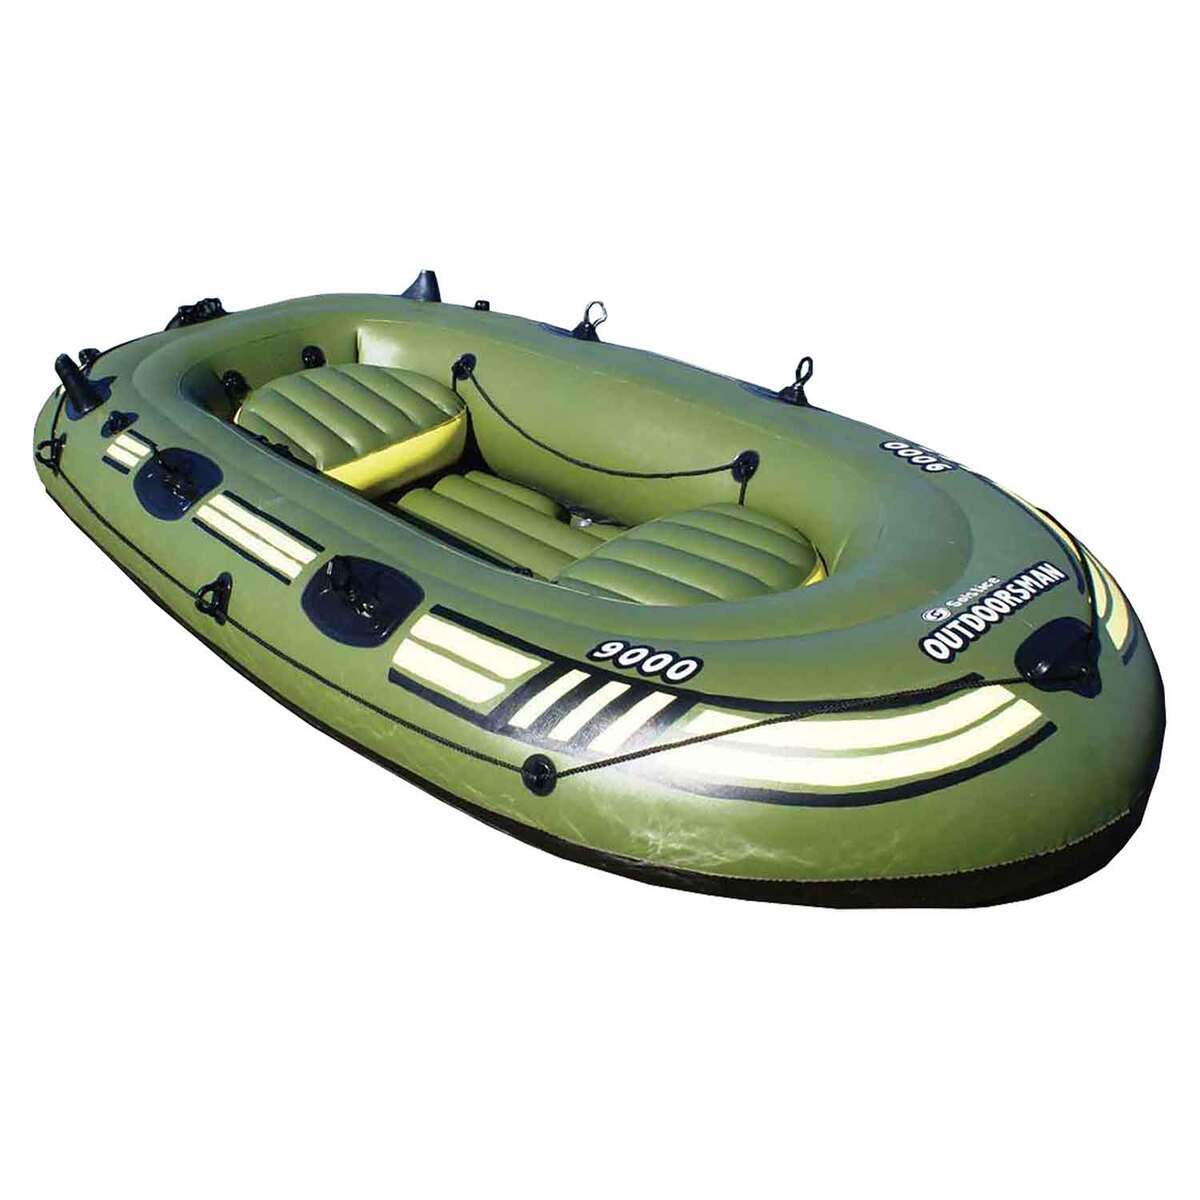 Angler Bay 6 Person Inflatable Boat